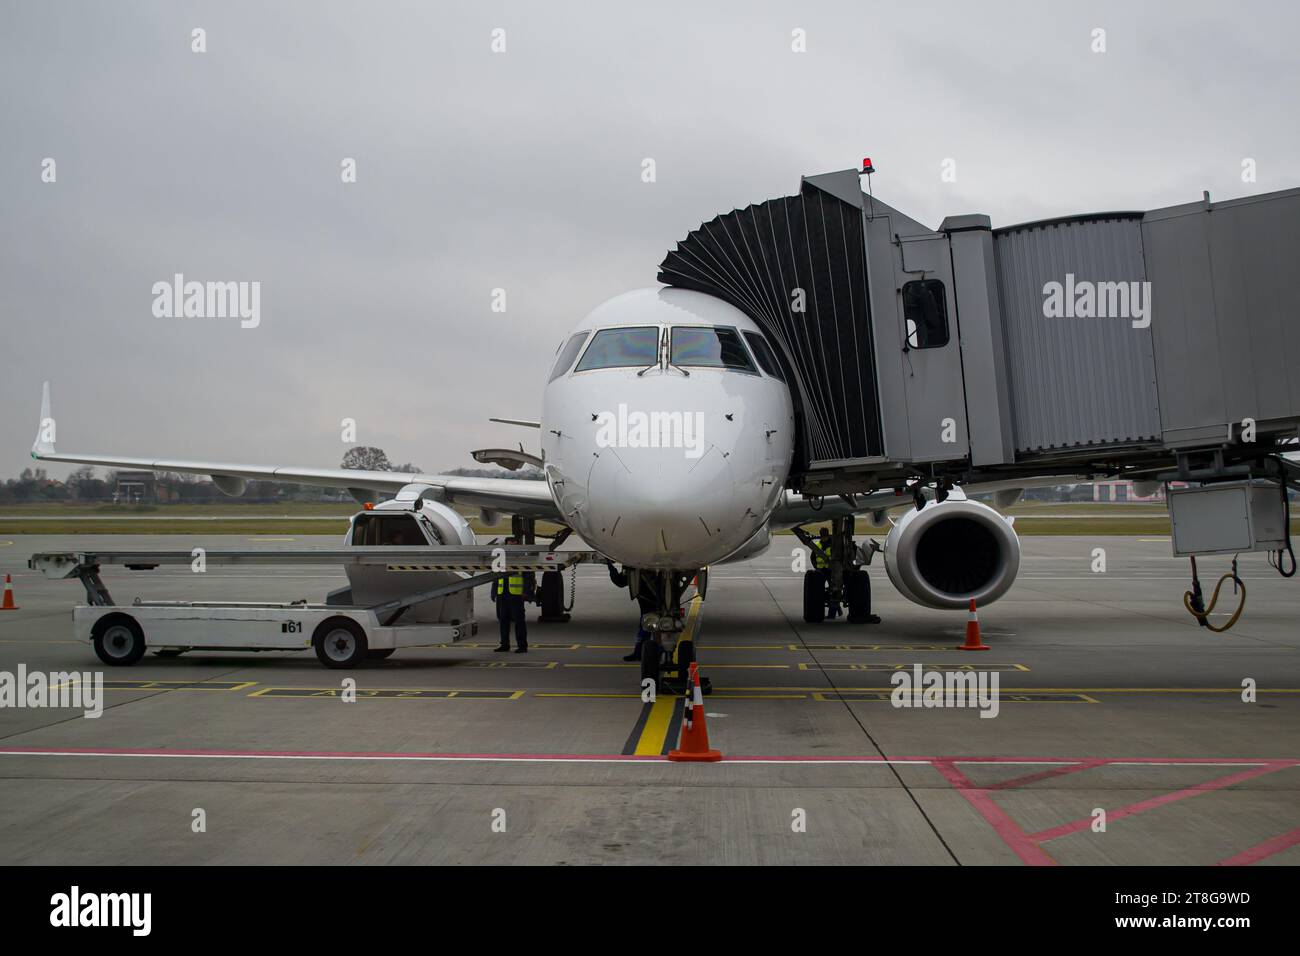 Aircraft shortly after arrival parked at the gate with an airbridge connected at Lviv Airport Stock Photo